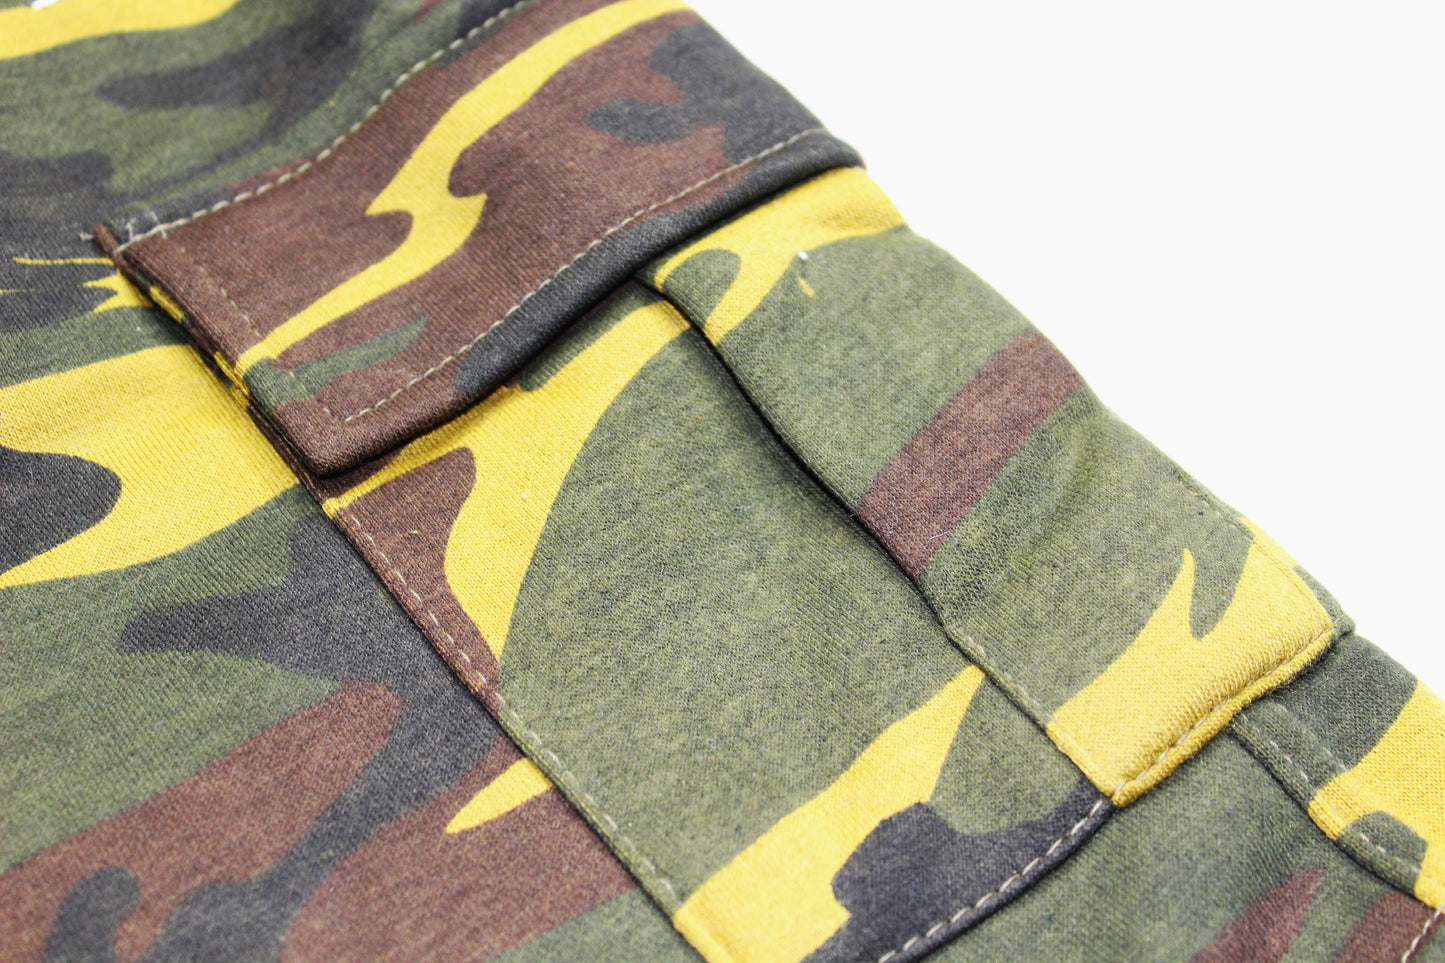 Classic Fit Camouflage Cotton Embroidered Cargo Shorts.